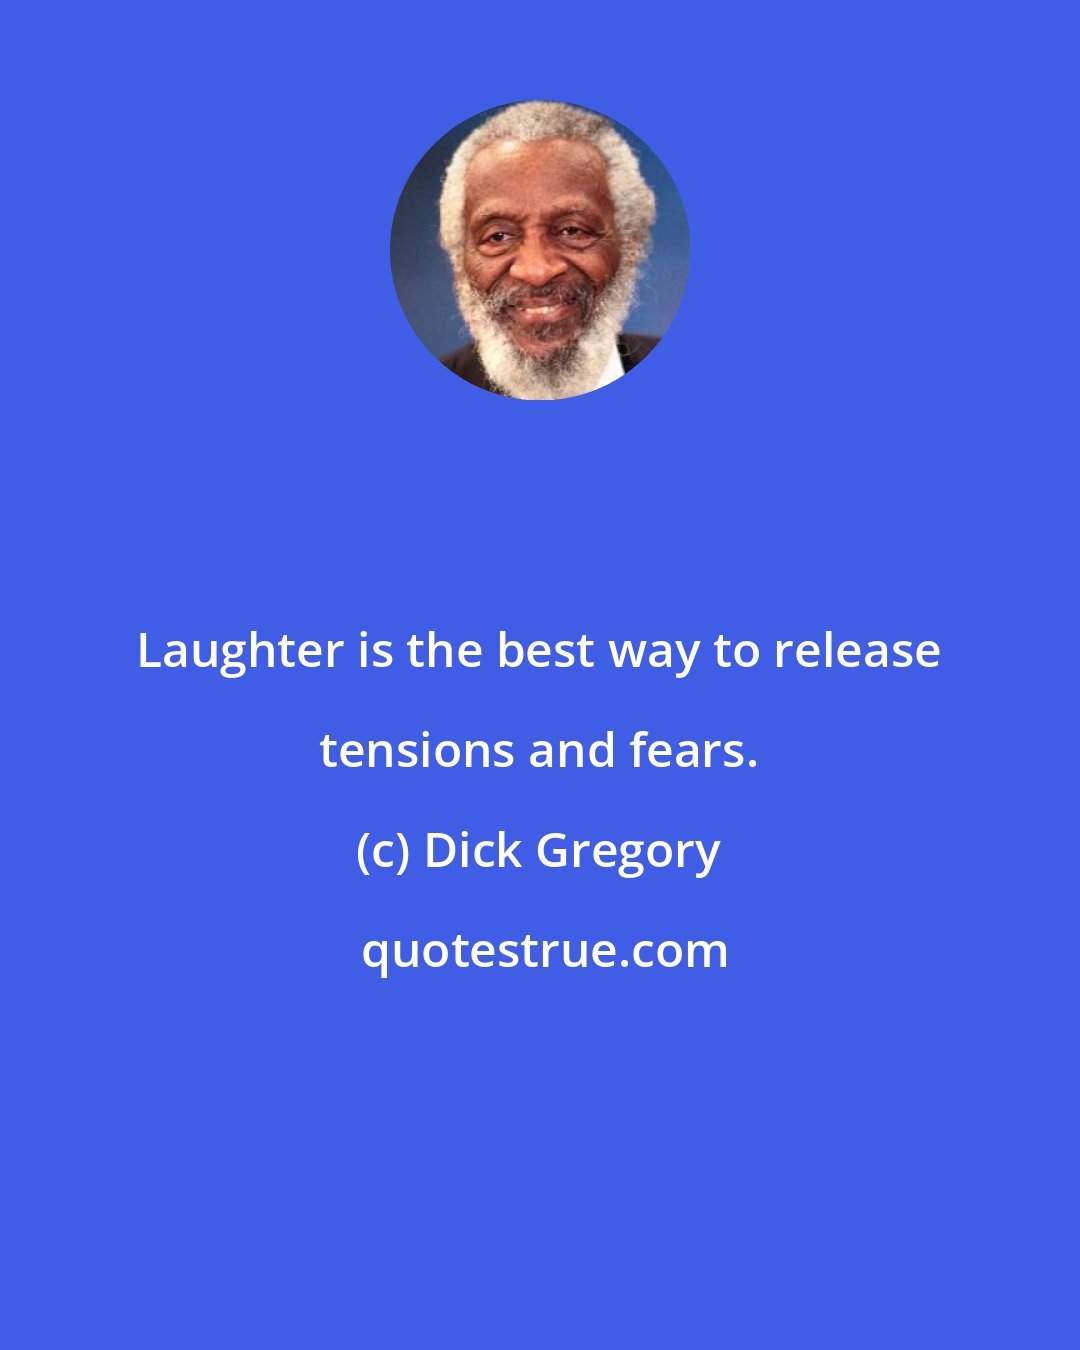 Dick Gregory: Laughter is the best way to release tensions and fears.